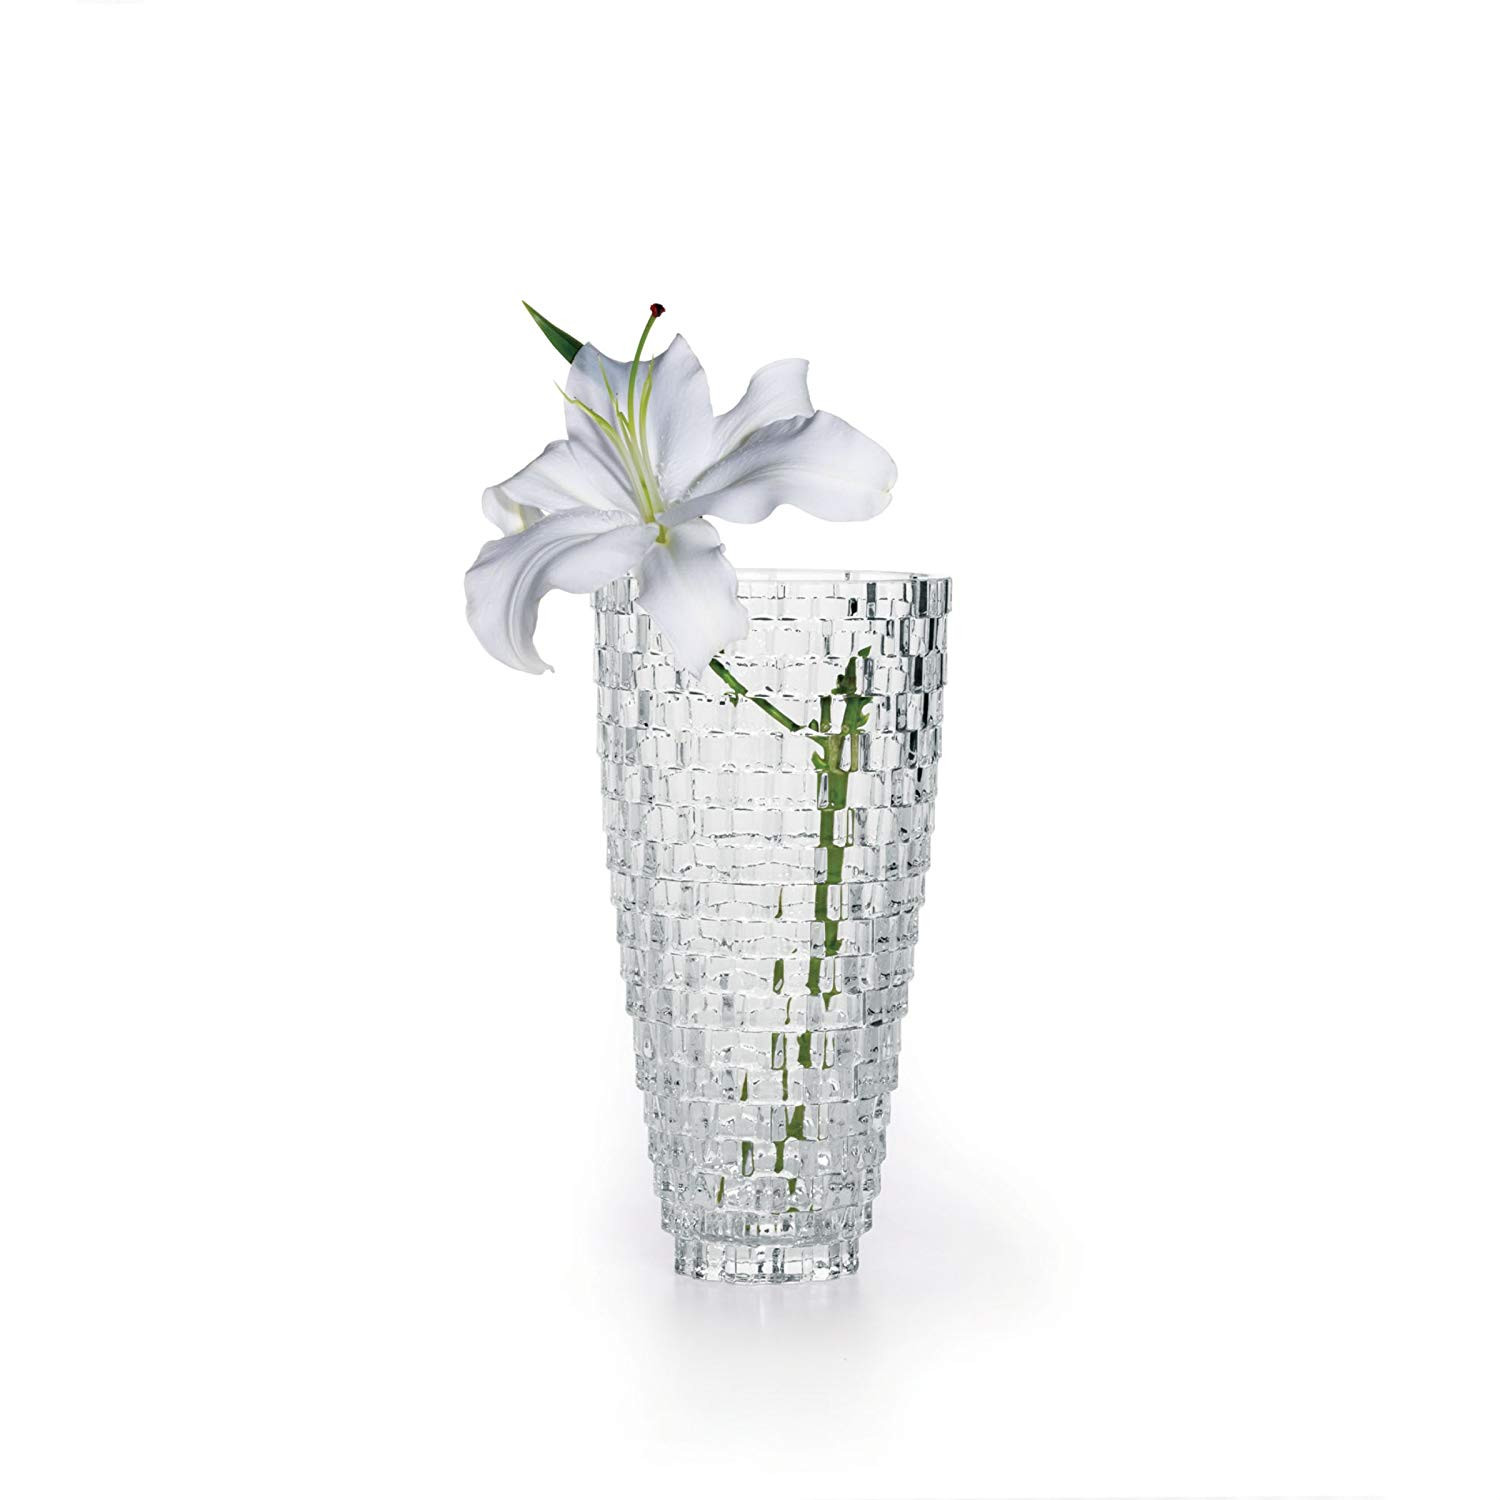 25 attractive Marquis by Waterford Shelton Vase 12 2024 free download marquis by waterford shelton vase 12 of amazon com mikasa palazzo vase crystal 9 home kitchen inside 71omlzr32fl sl1500